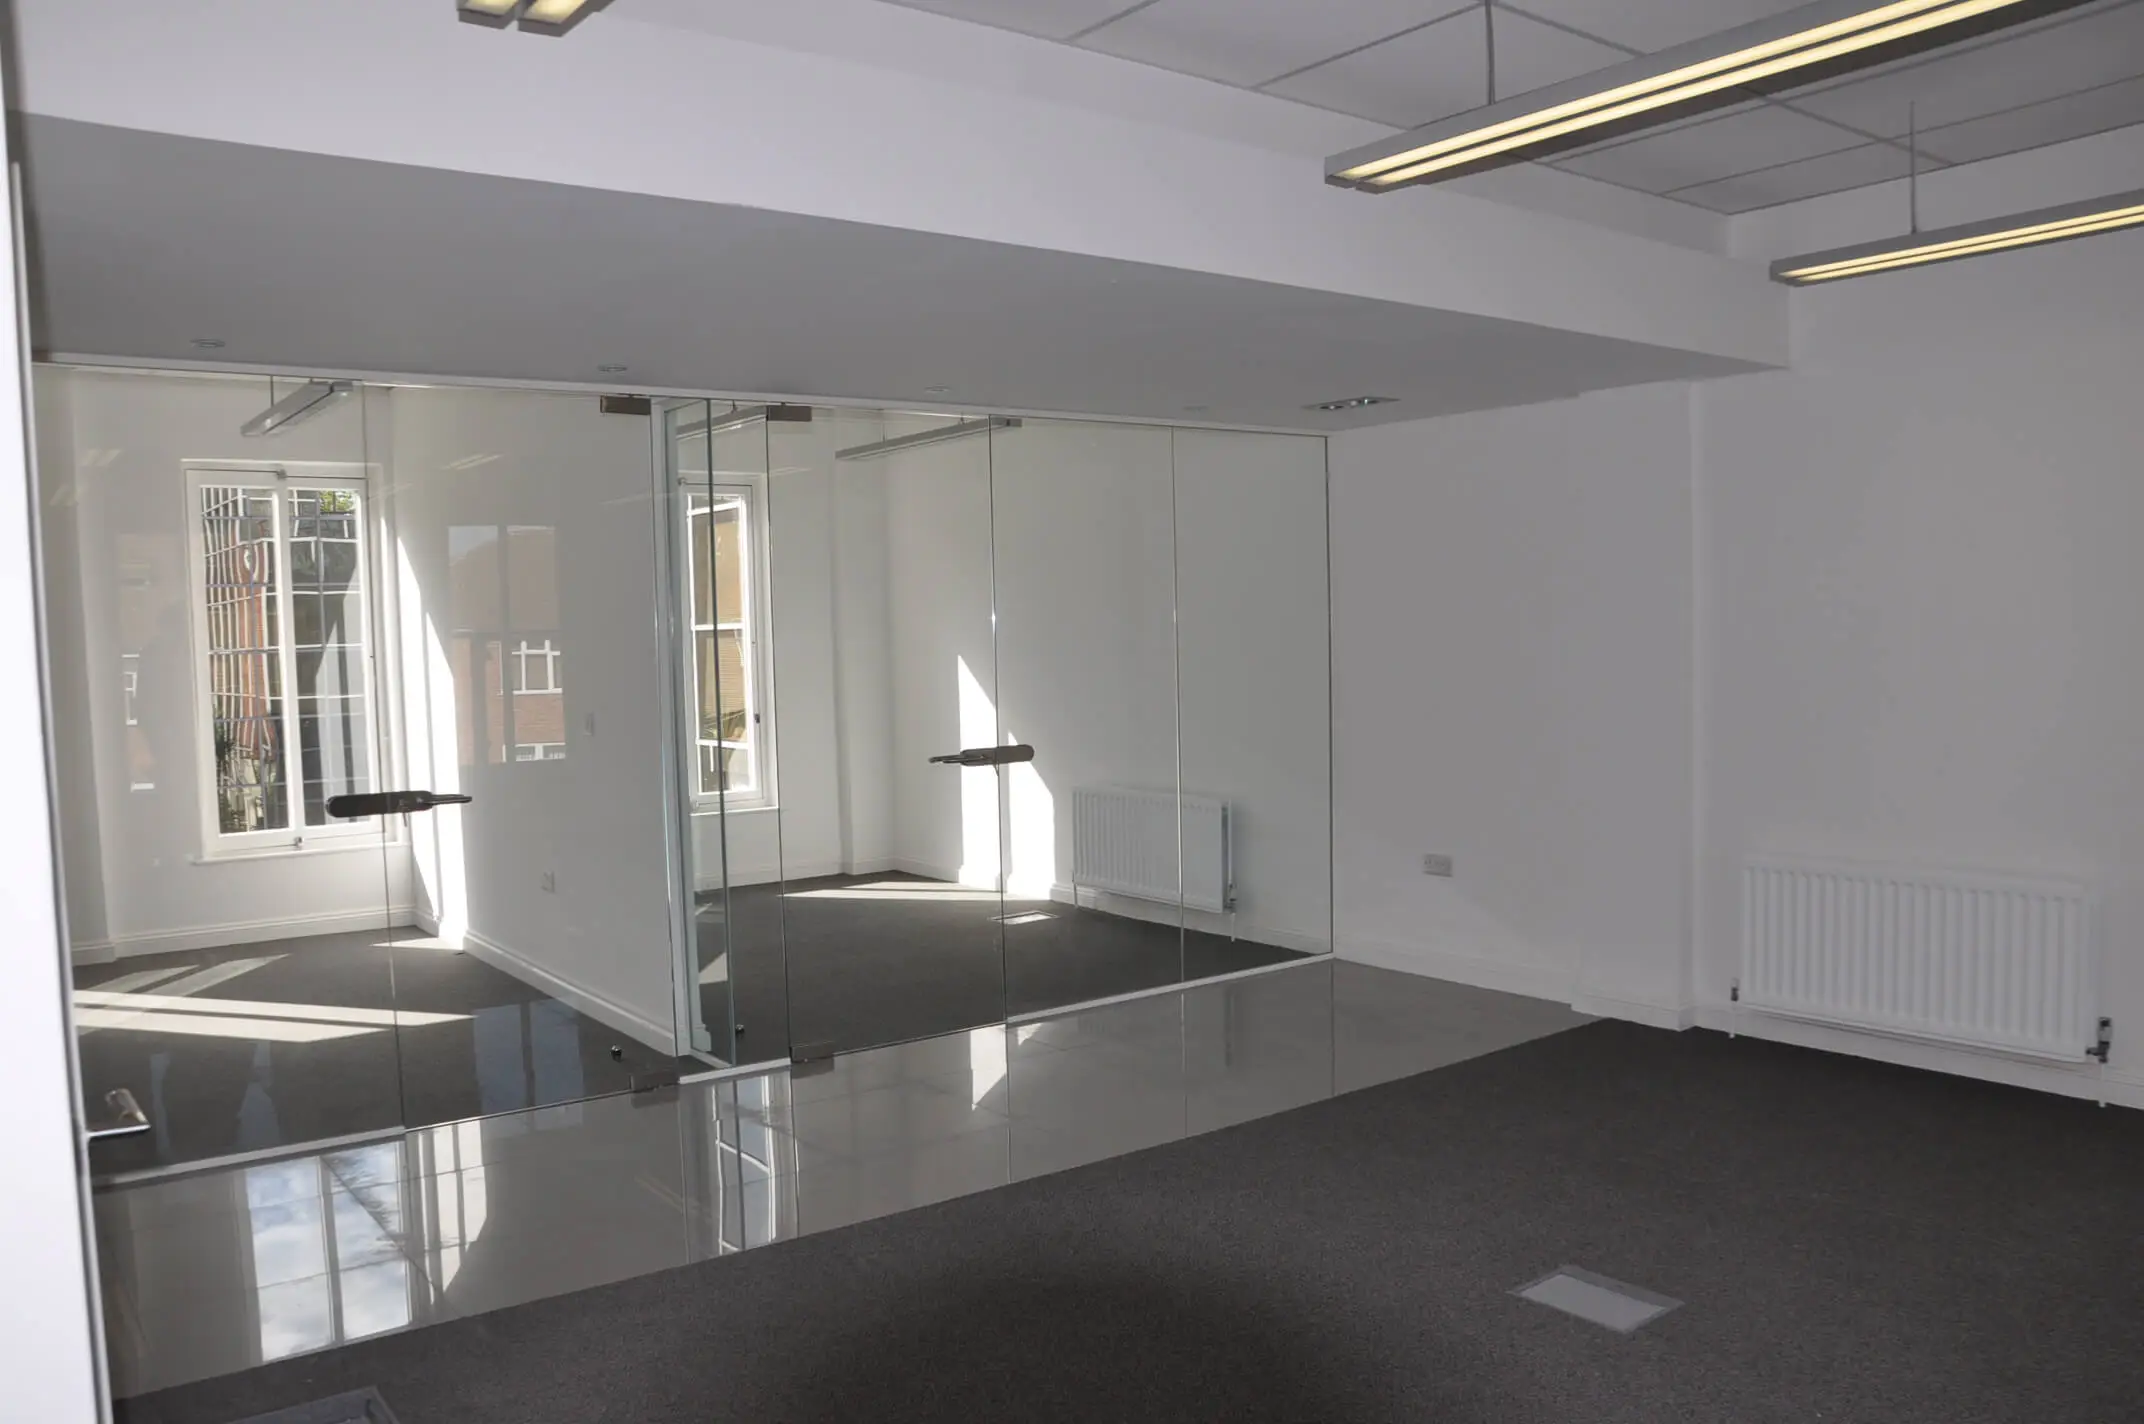 Office with frameless glass doors rooms